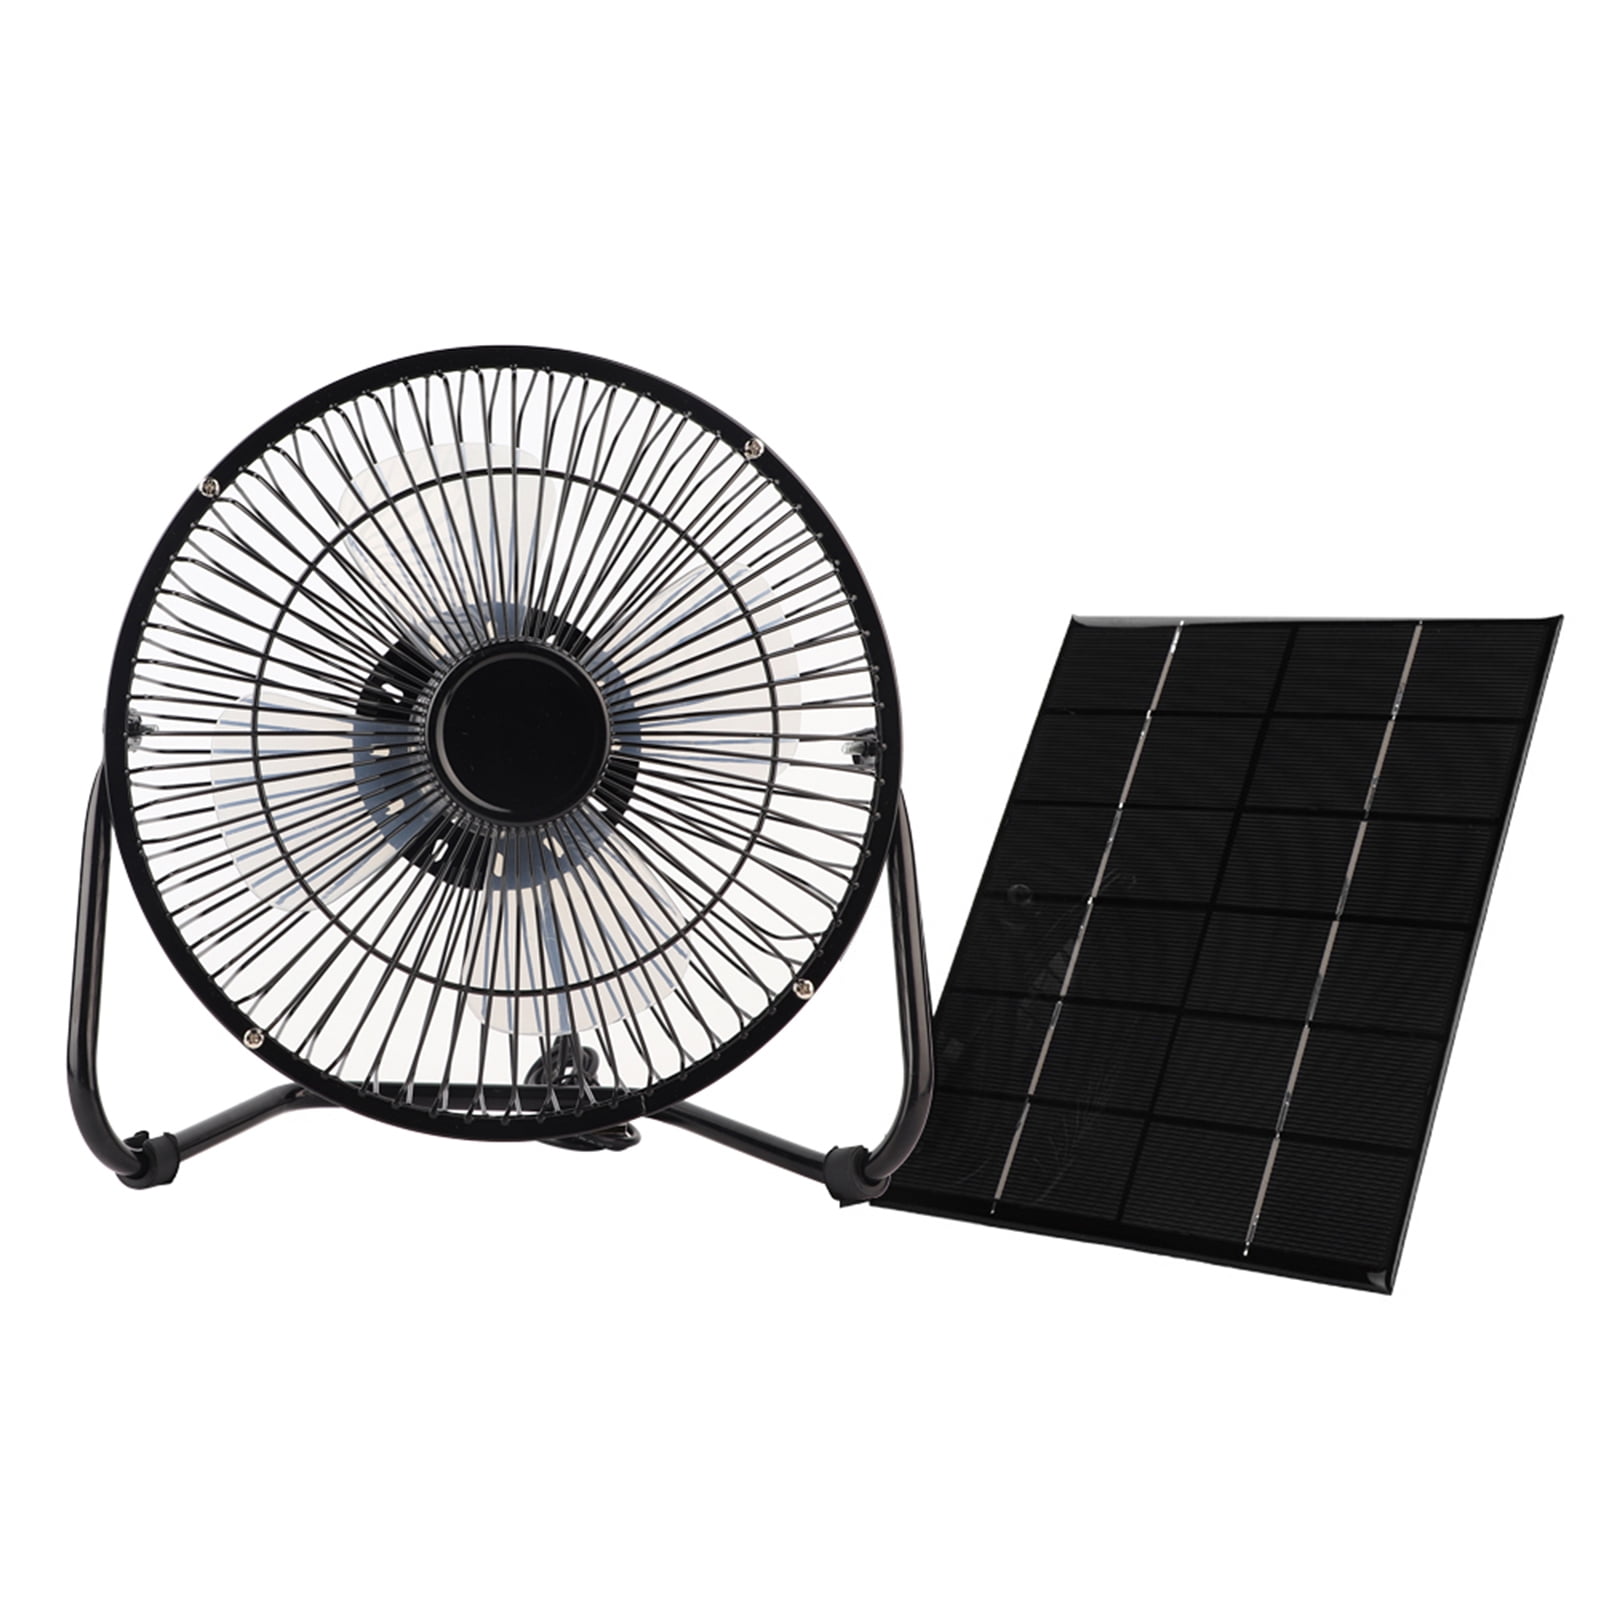 Black Solar Panel Powered/USB Iron Fan Outdoor Traveling Fishing Home Office Camping Car Cooling Fan 4/6/8Inch 3W/5W-in Heating